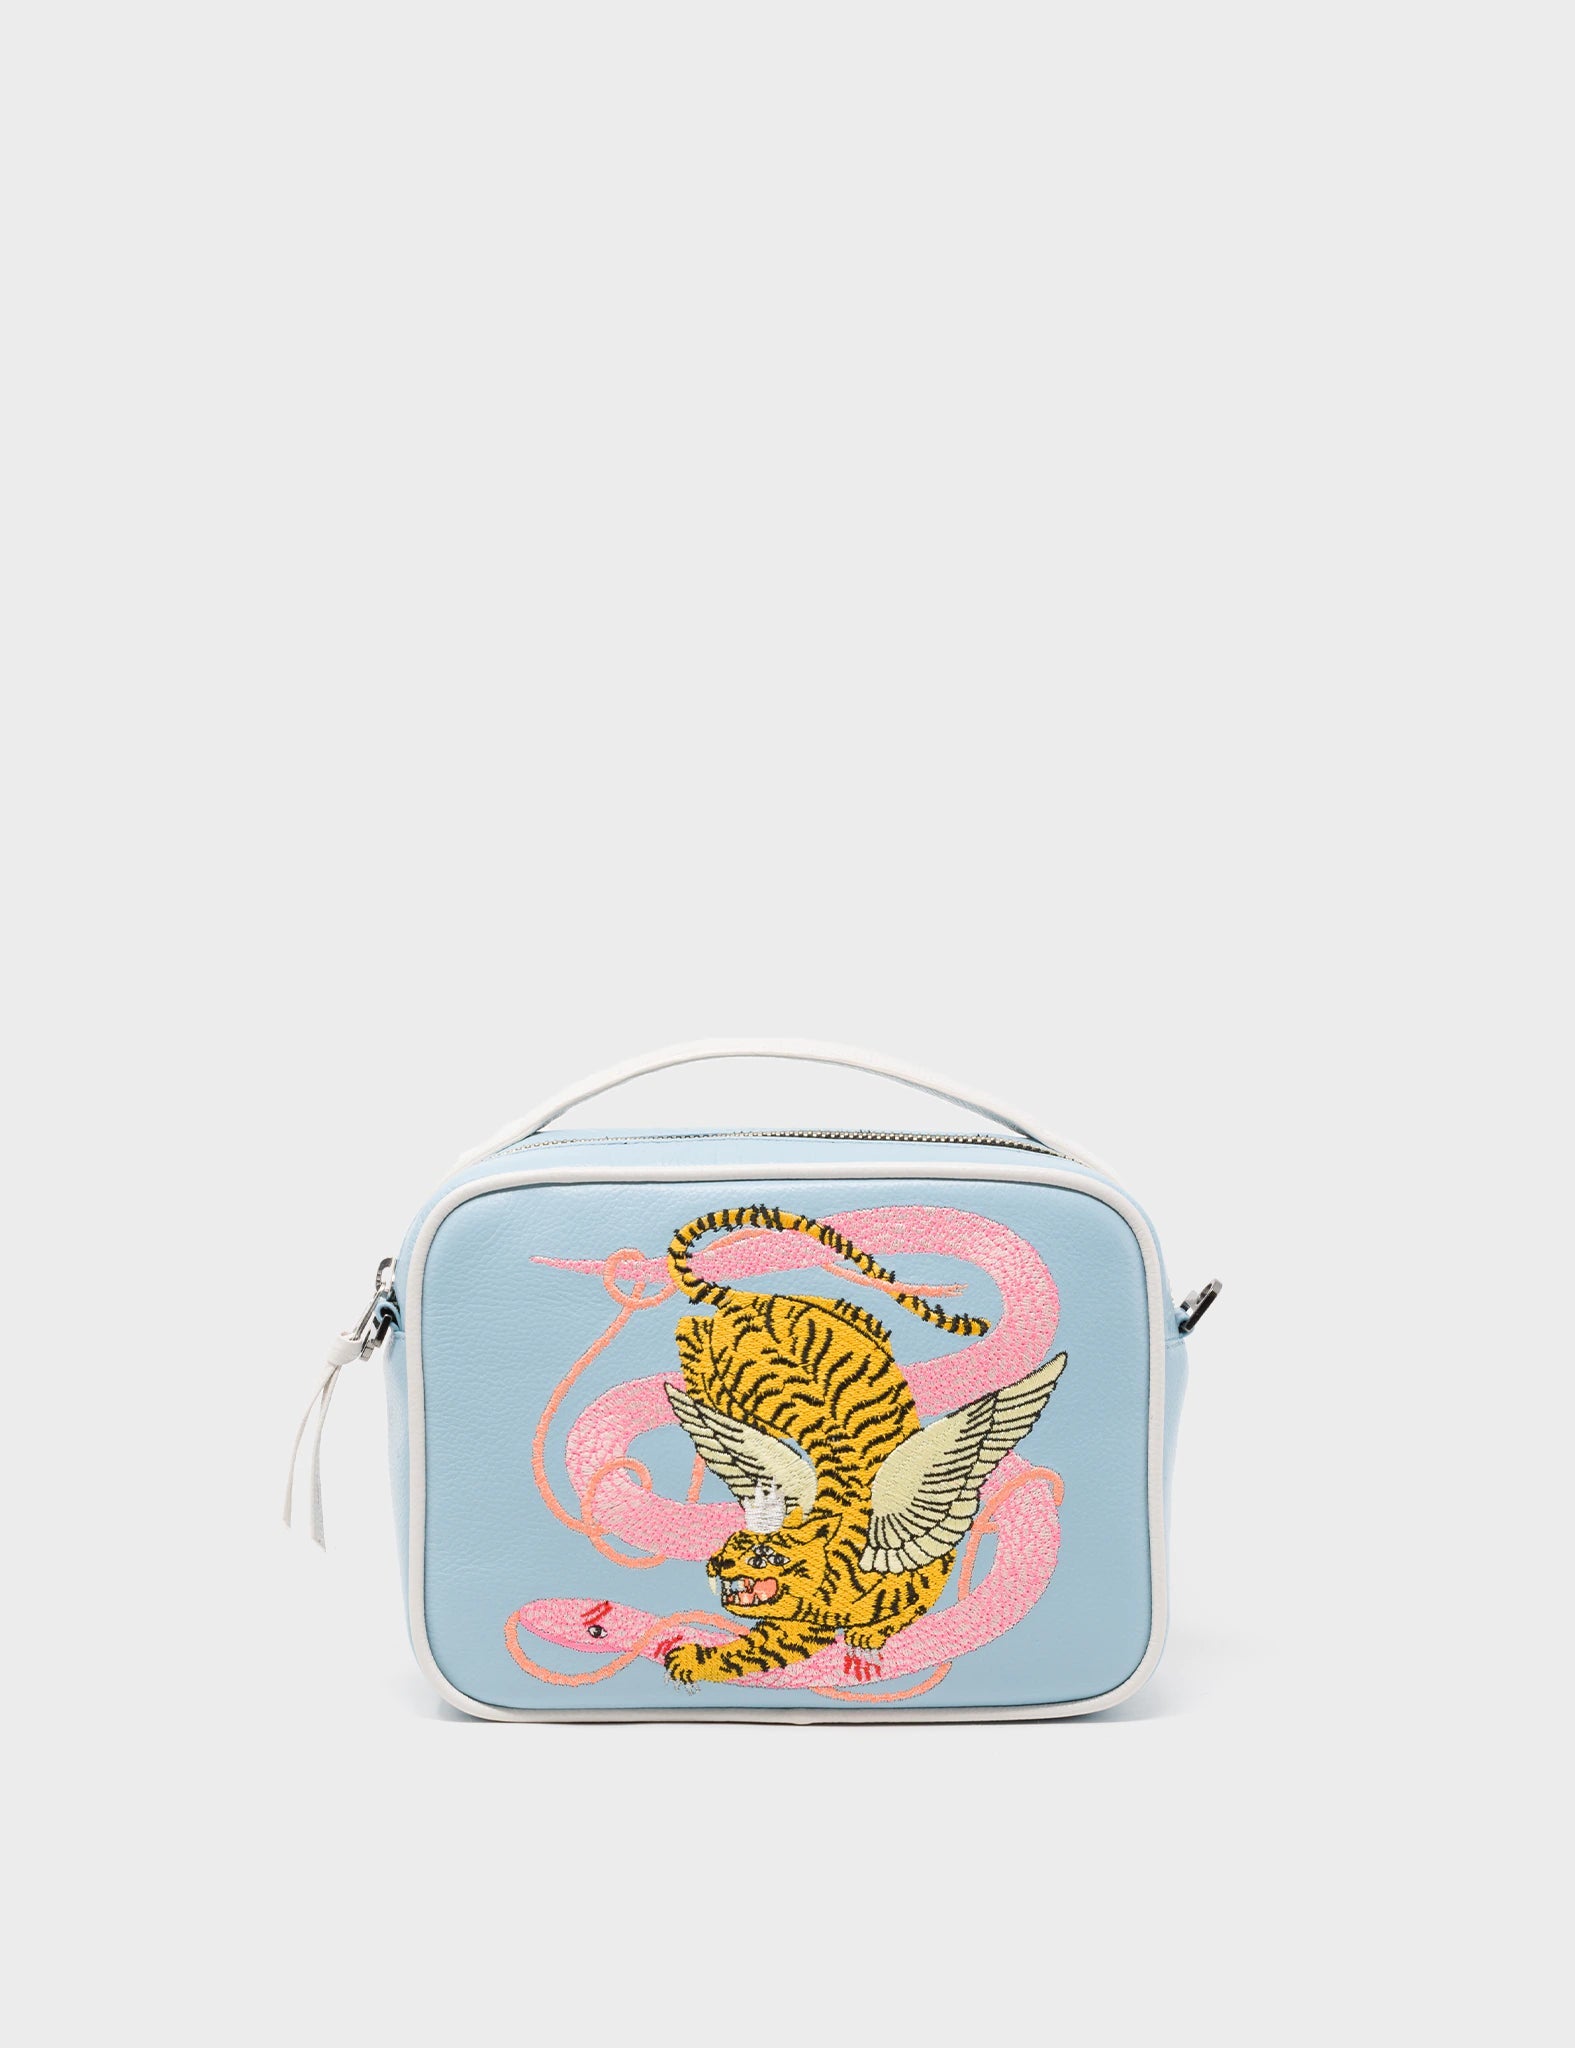 Stratosphere Blue Leather Crossbody Handbag - Tiger and Snake Embroidery - Front